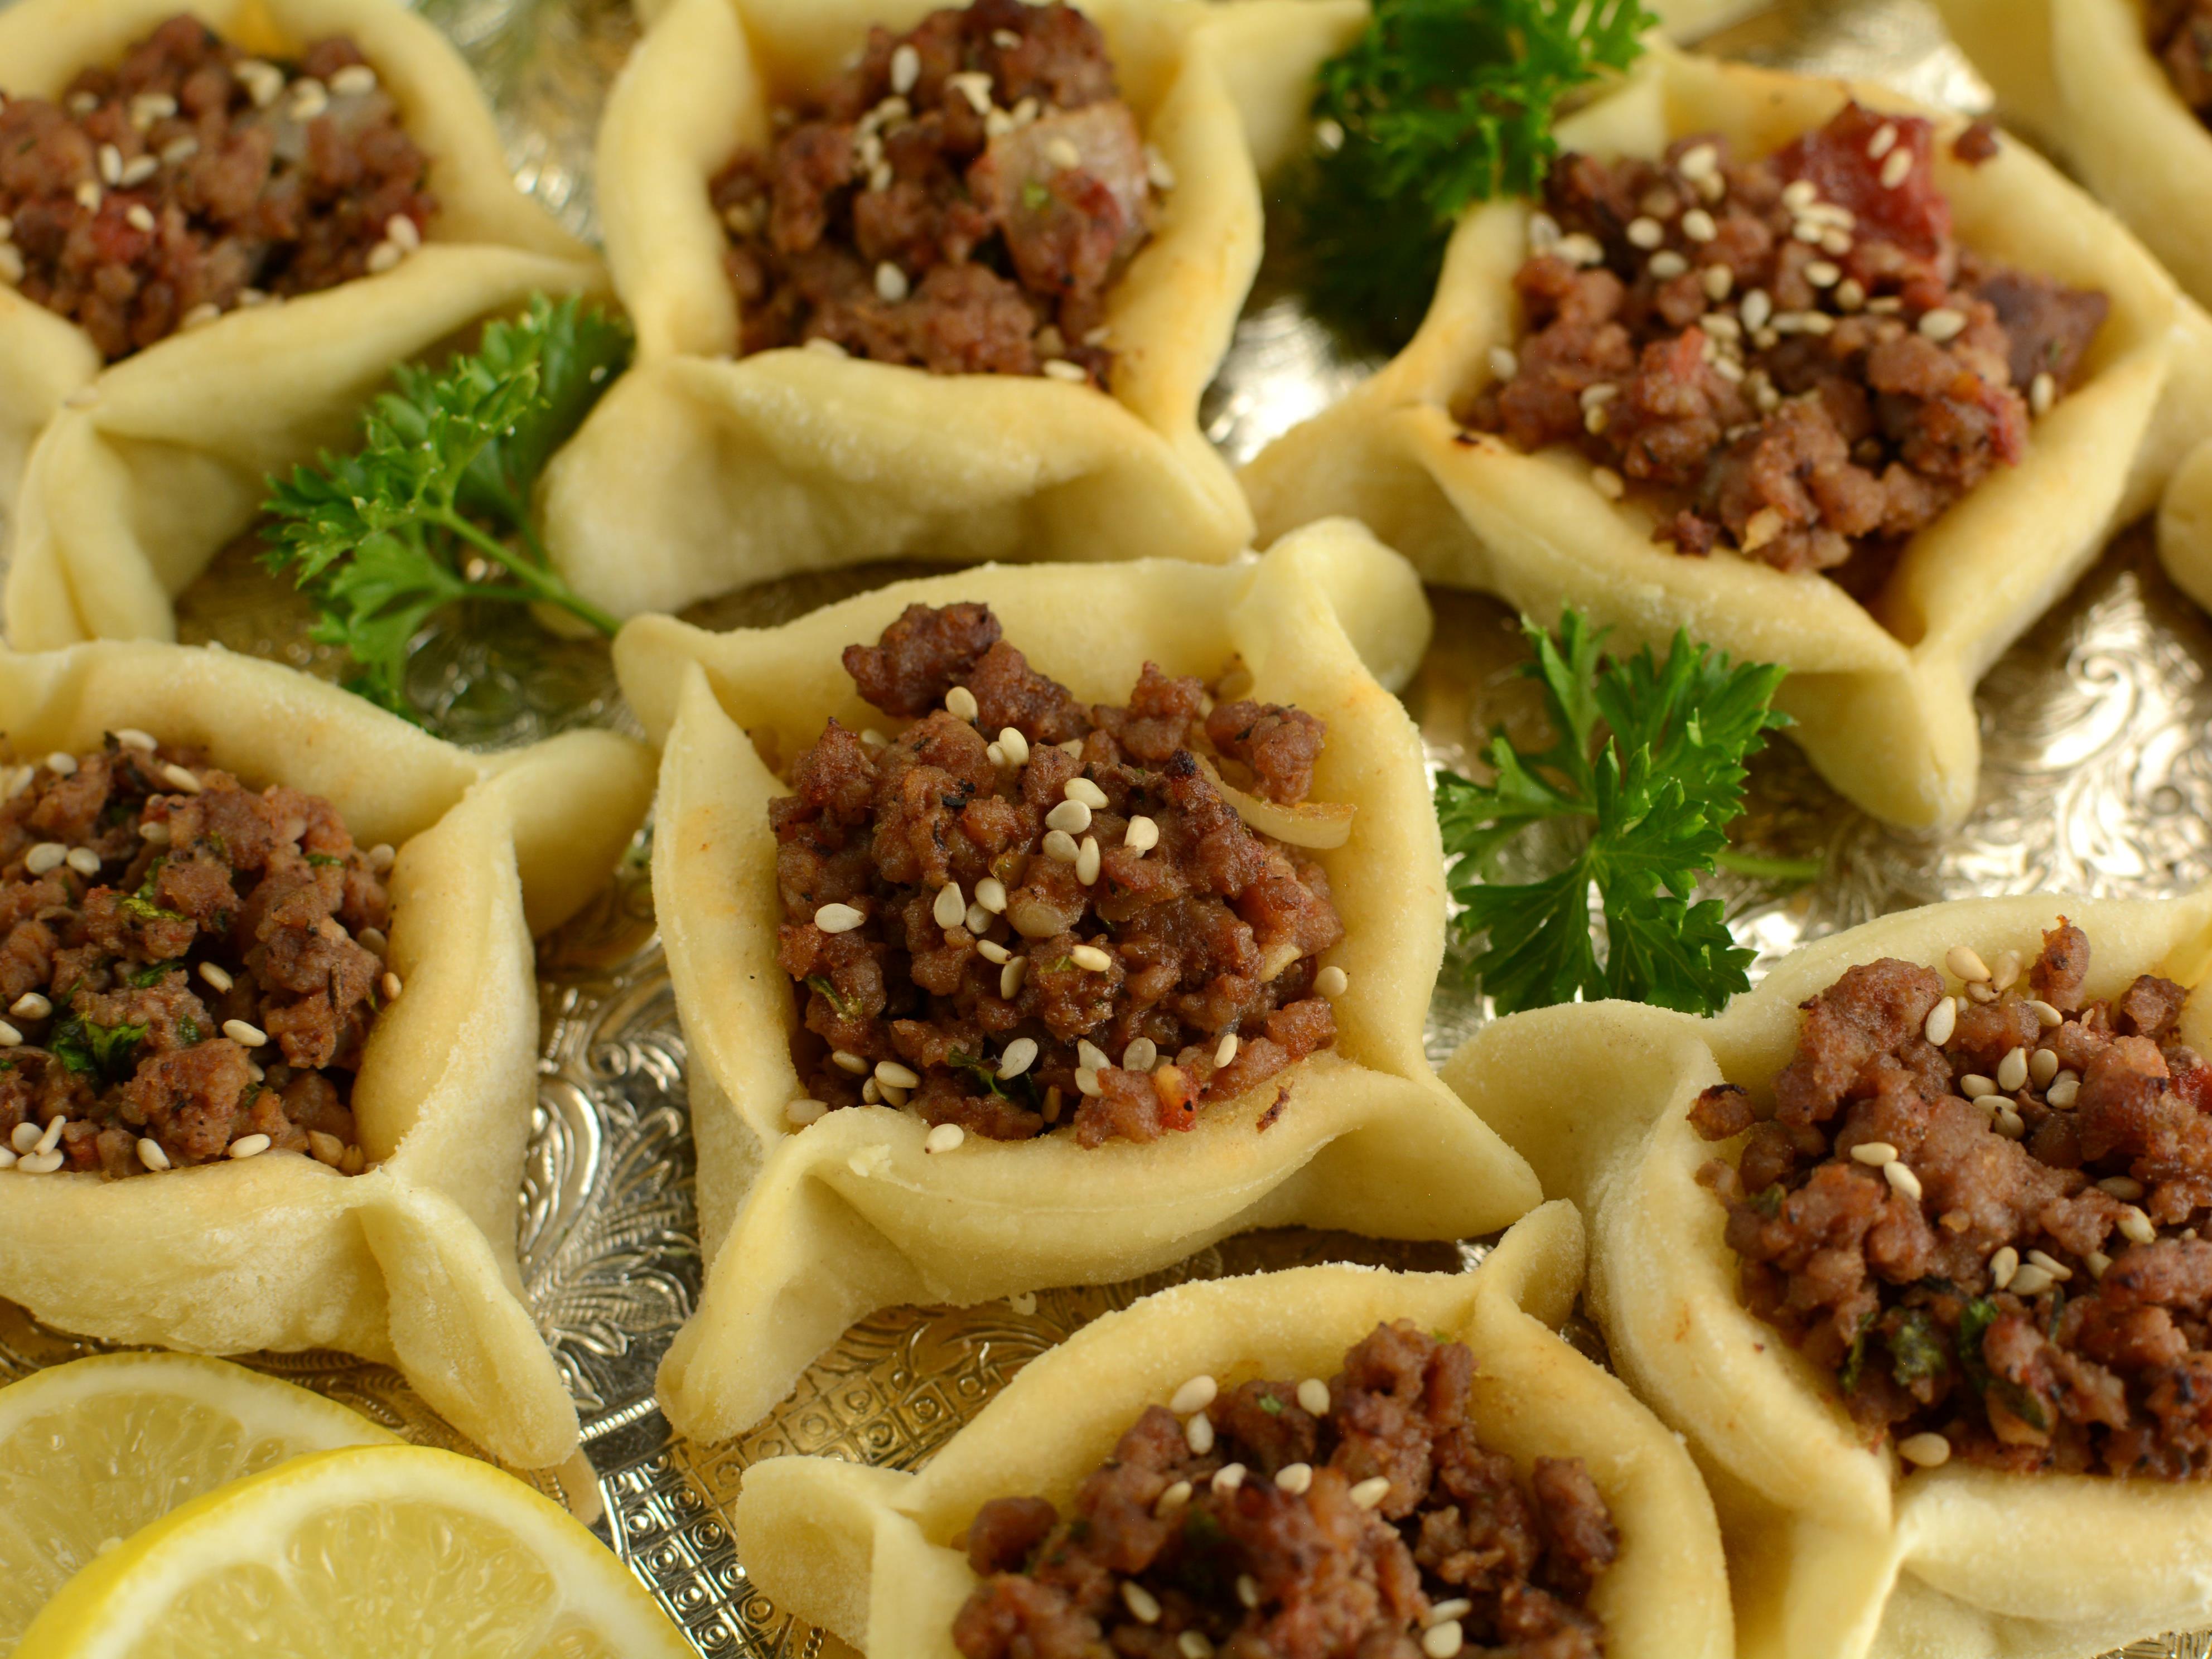 <p><a href="https://thelemonbowl.com/lebanese-meat-pies-sfeehas/">These</a> savory meat pies are made with butter, pine nuts, and cinnamon. </p><p>The filling is made of <a href="https://www.insider.com/best-ground-beef-recipes-2018-12">ground beef</a> or lamb sauteed in butter and allspice.</p><p>They're commonly eaten with stuffed grape leaves, hummus, or plain yogurt. </p>